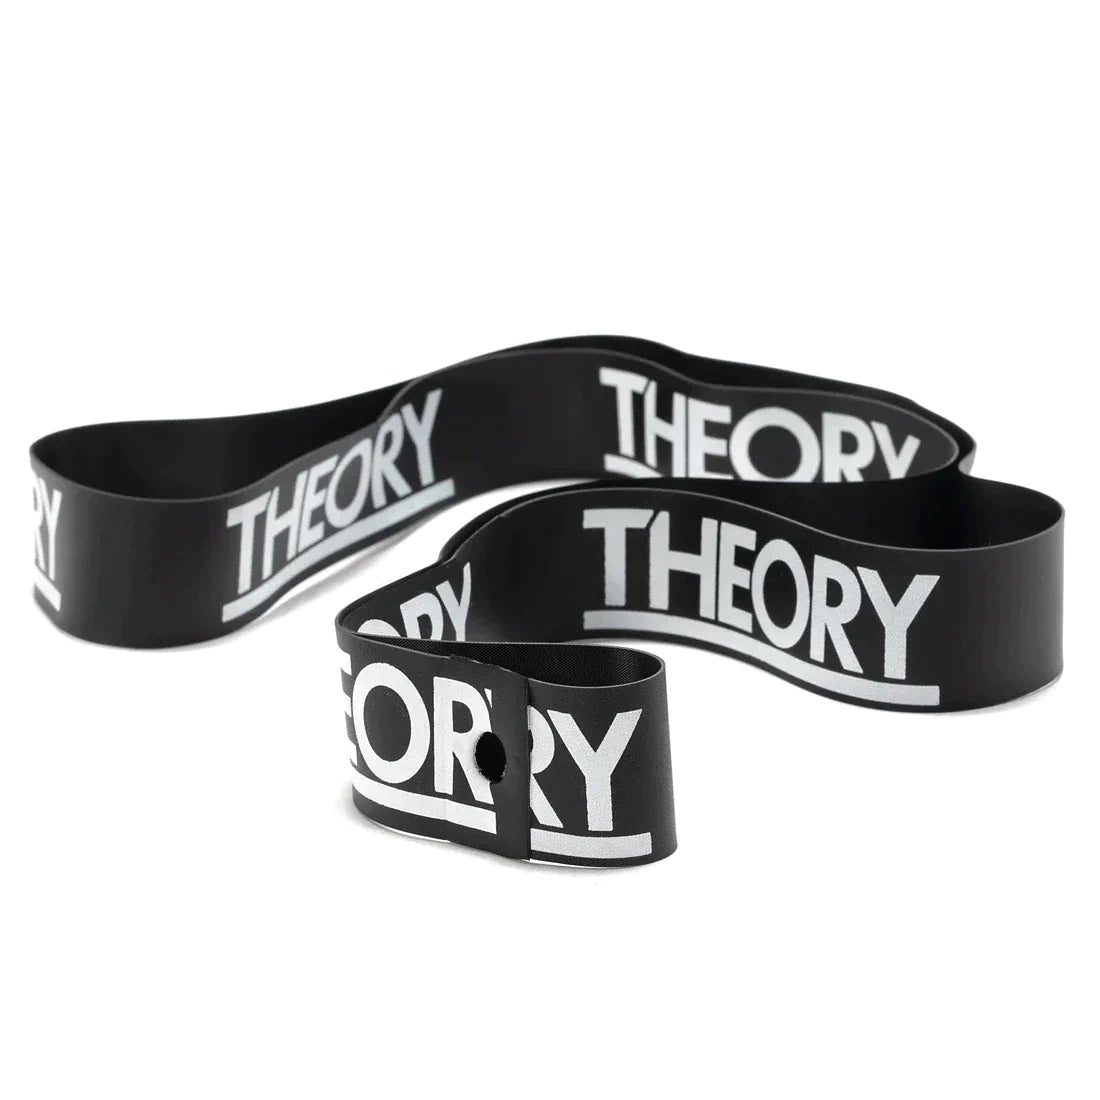 24" Theory Rim Strips - Pair - 30mm wide